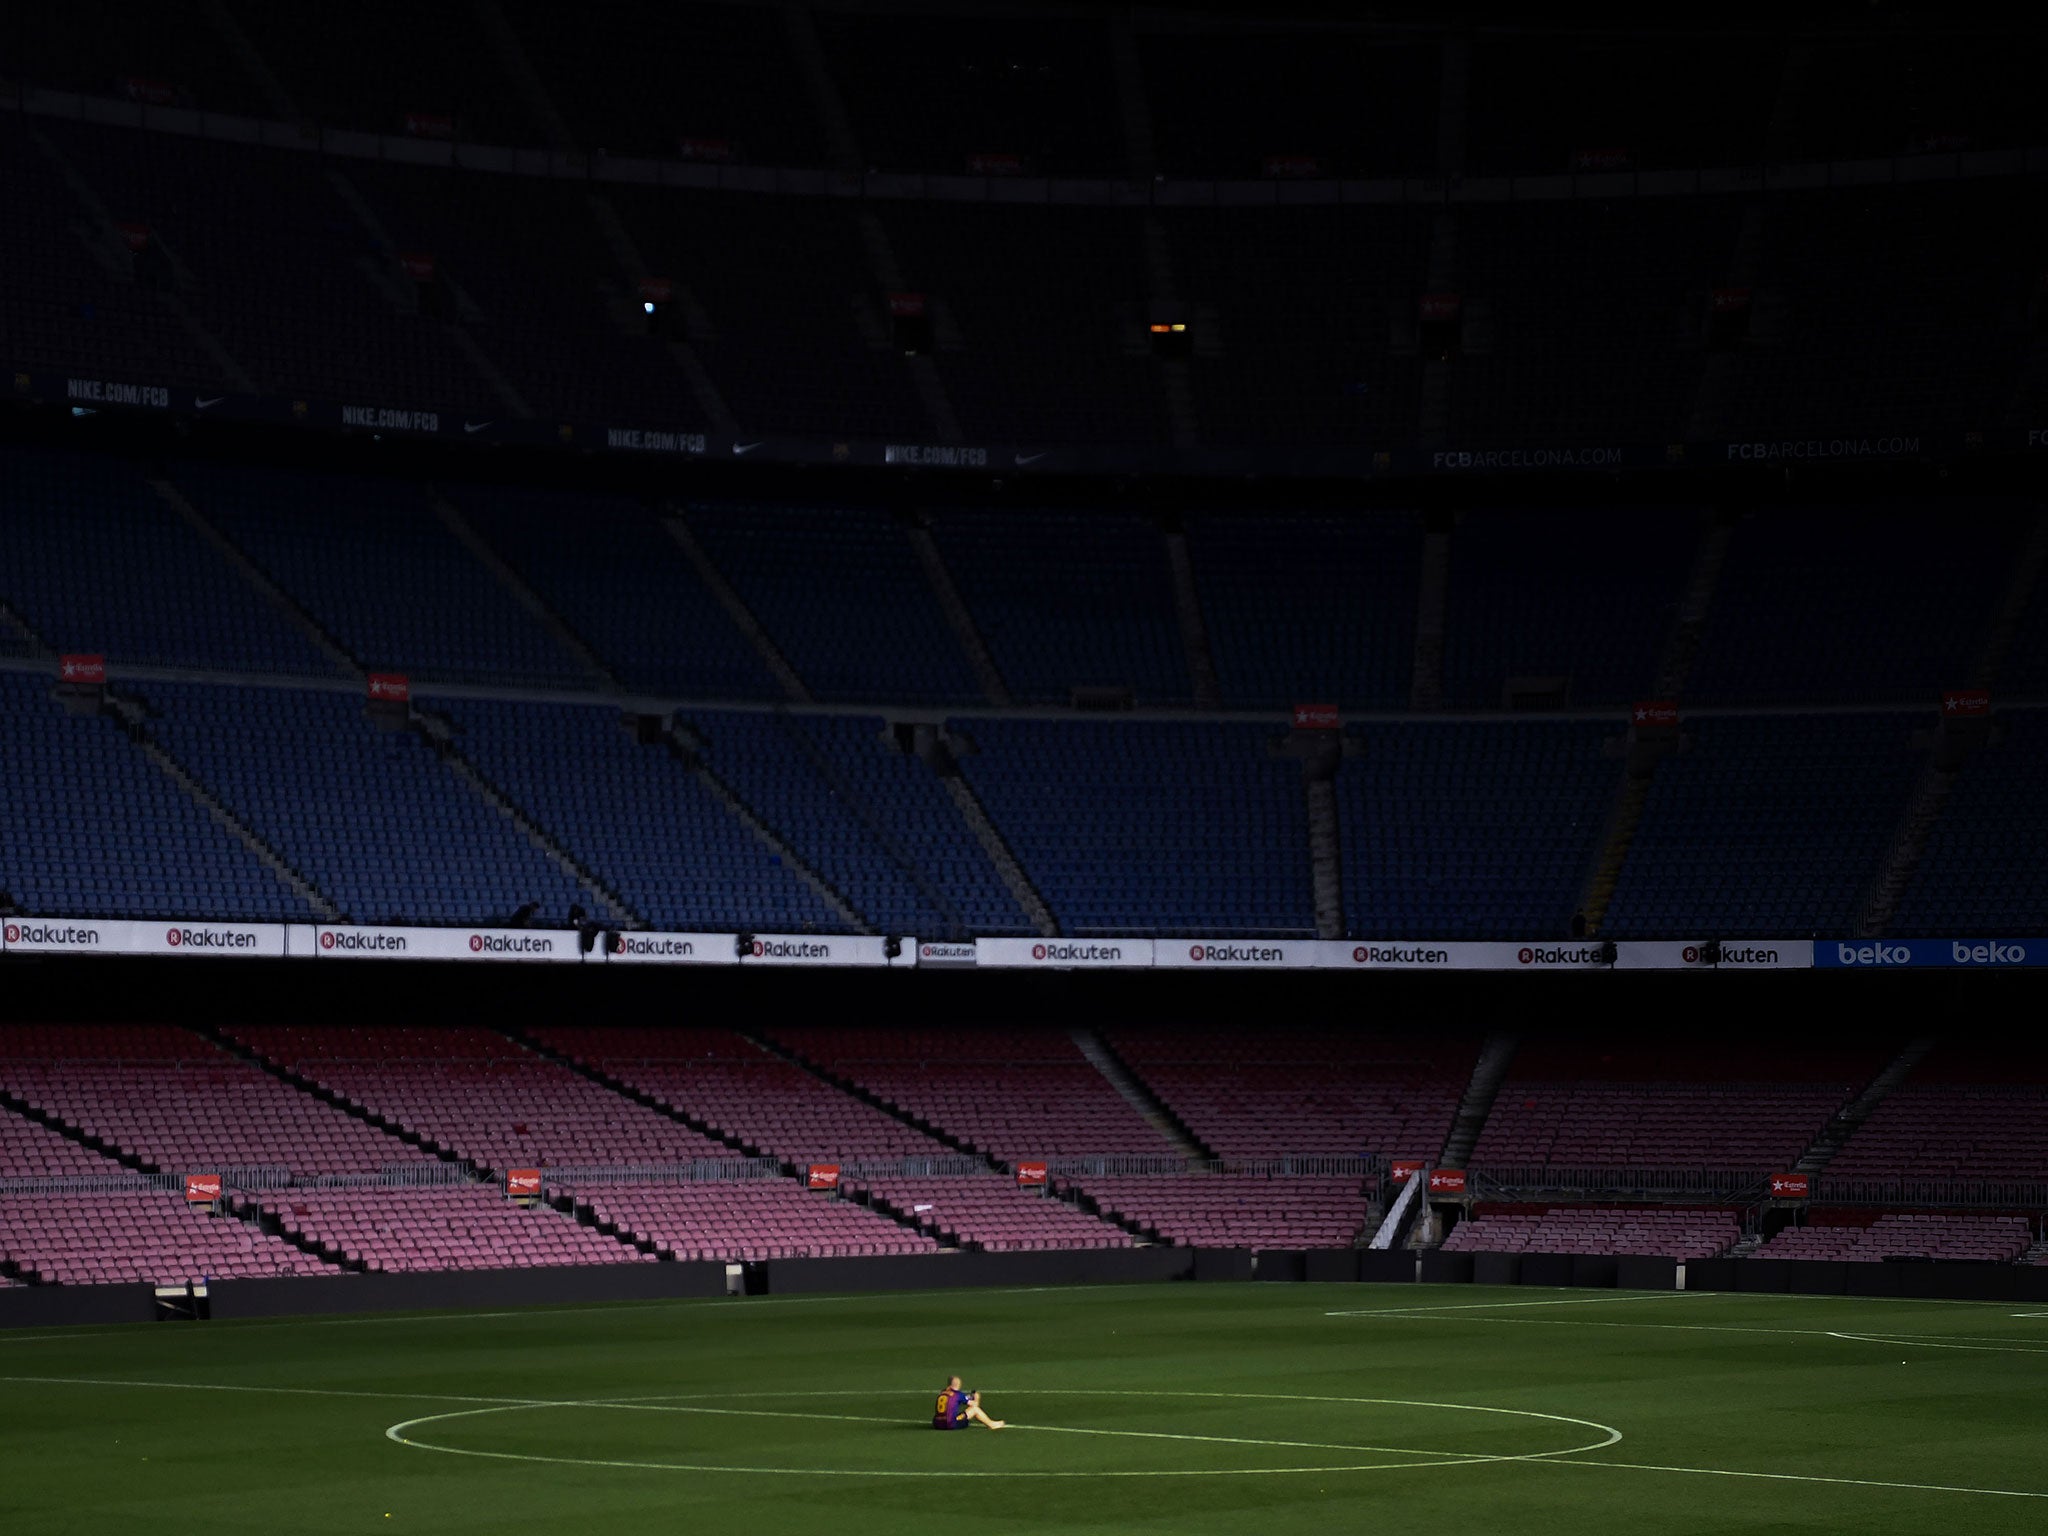 Iniesta left the Nou Camp for the final time